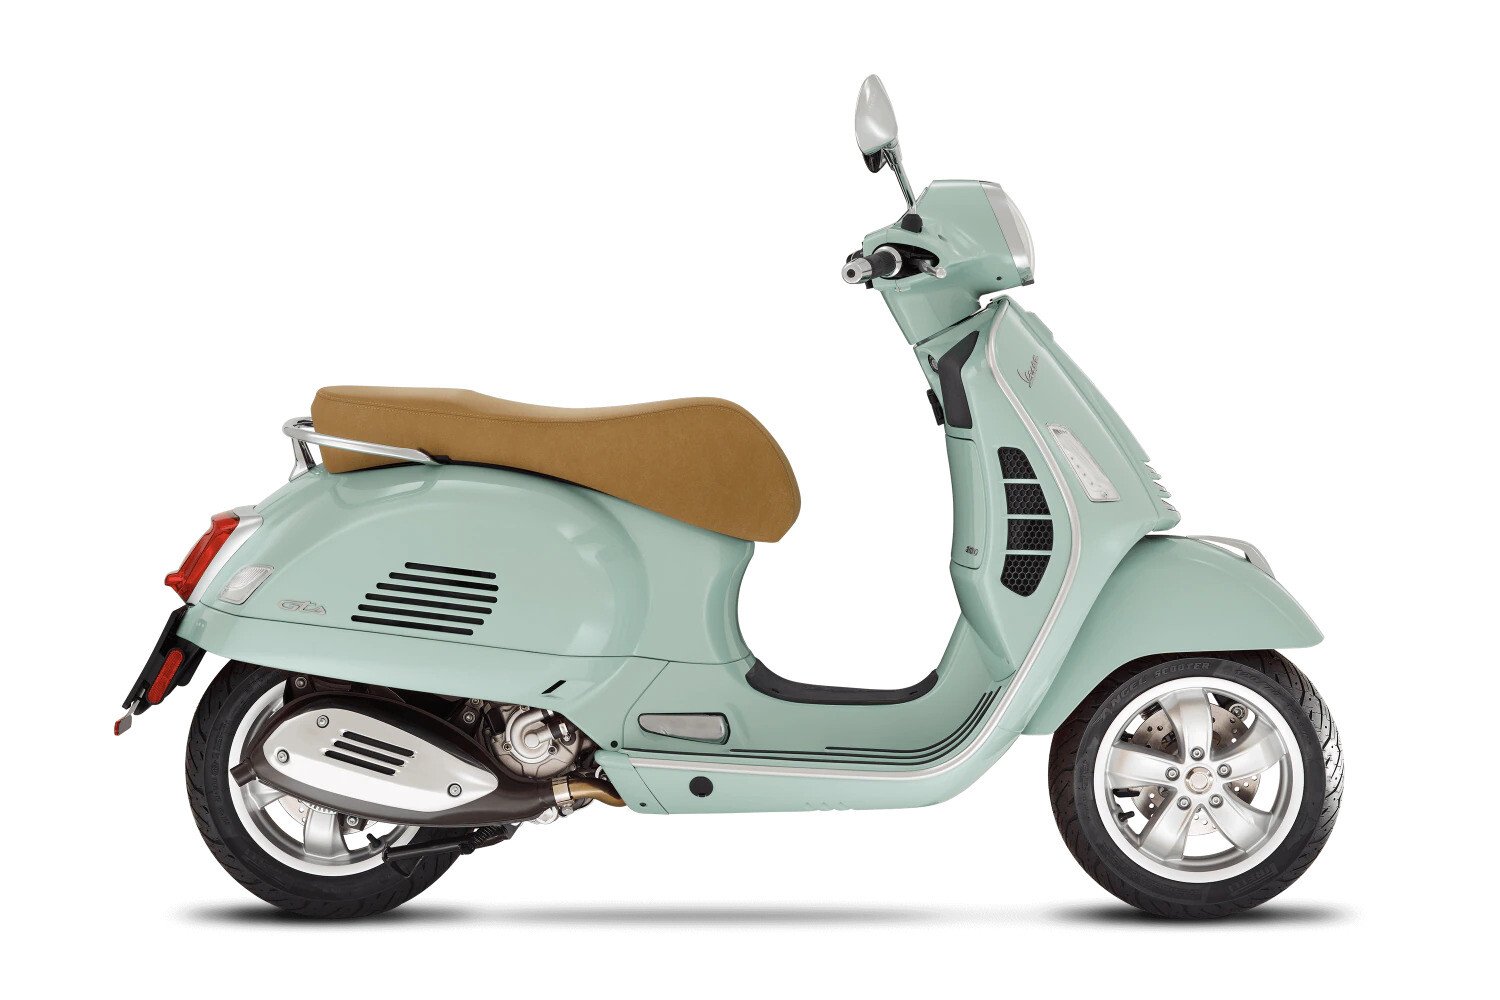 Top 10 Scooters – Vespa GTS 300